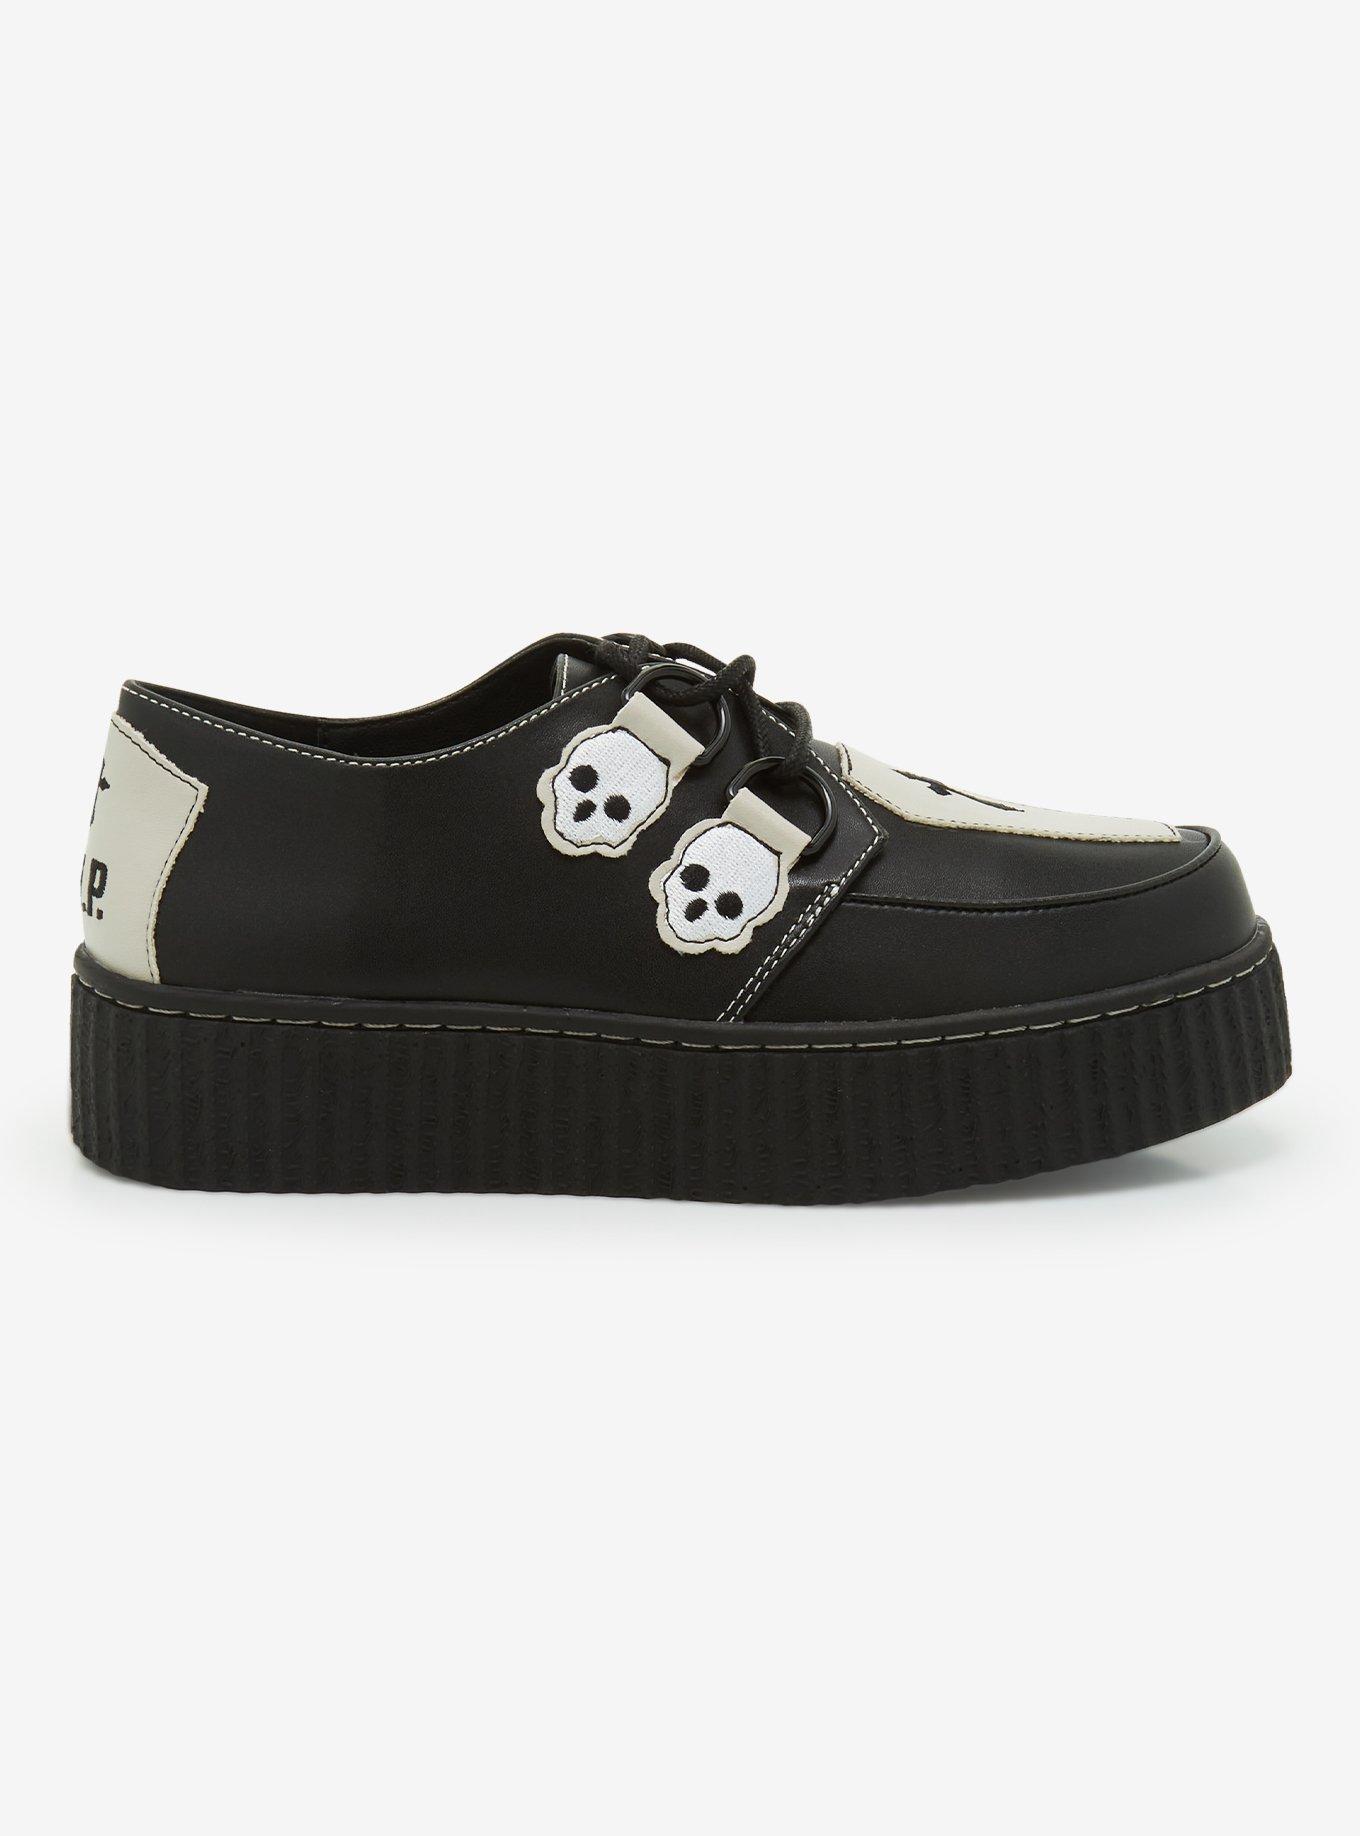 baan Beoefend hoop Creepers: Black Creeper Shoes & Plaform Creepers | Hot Topic